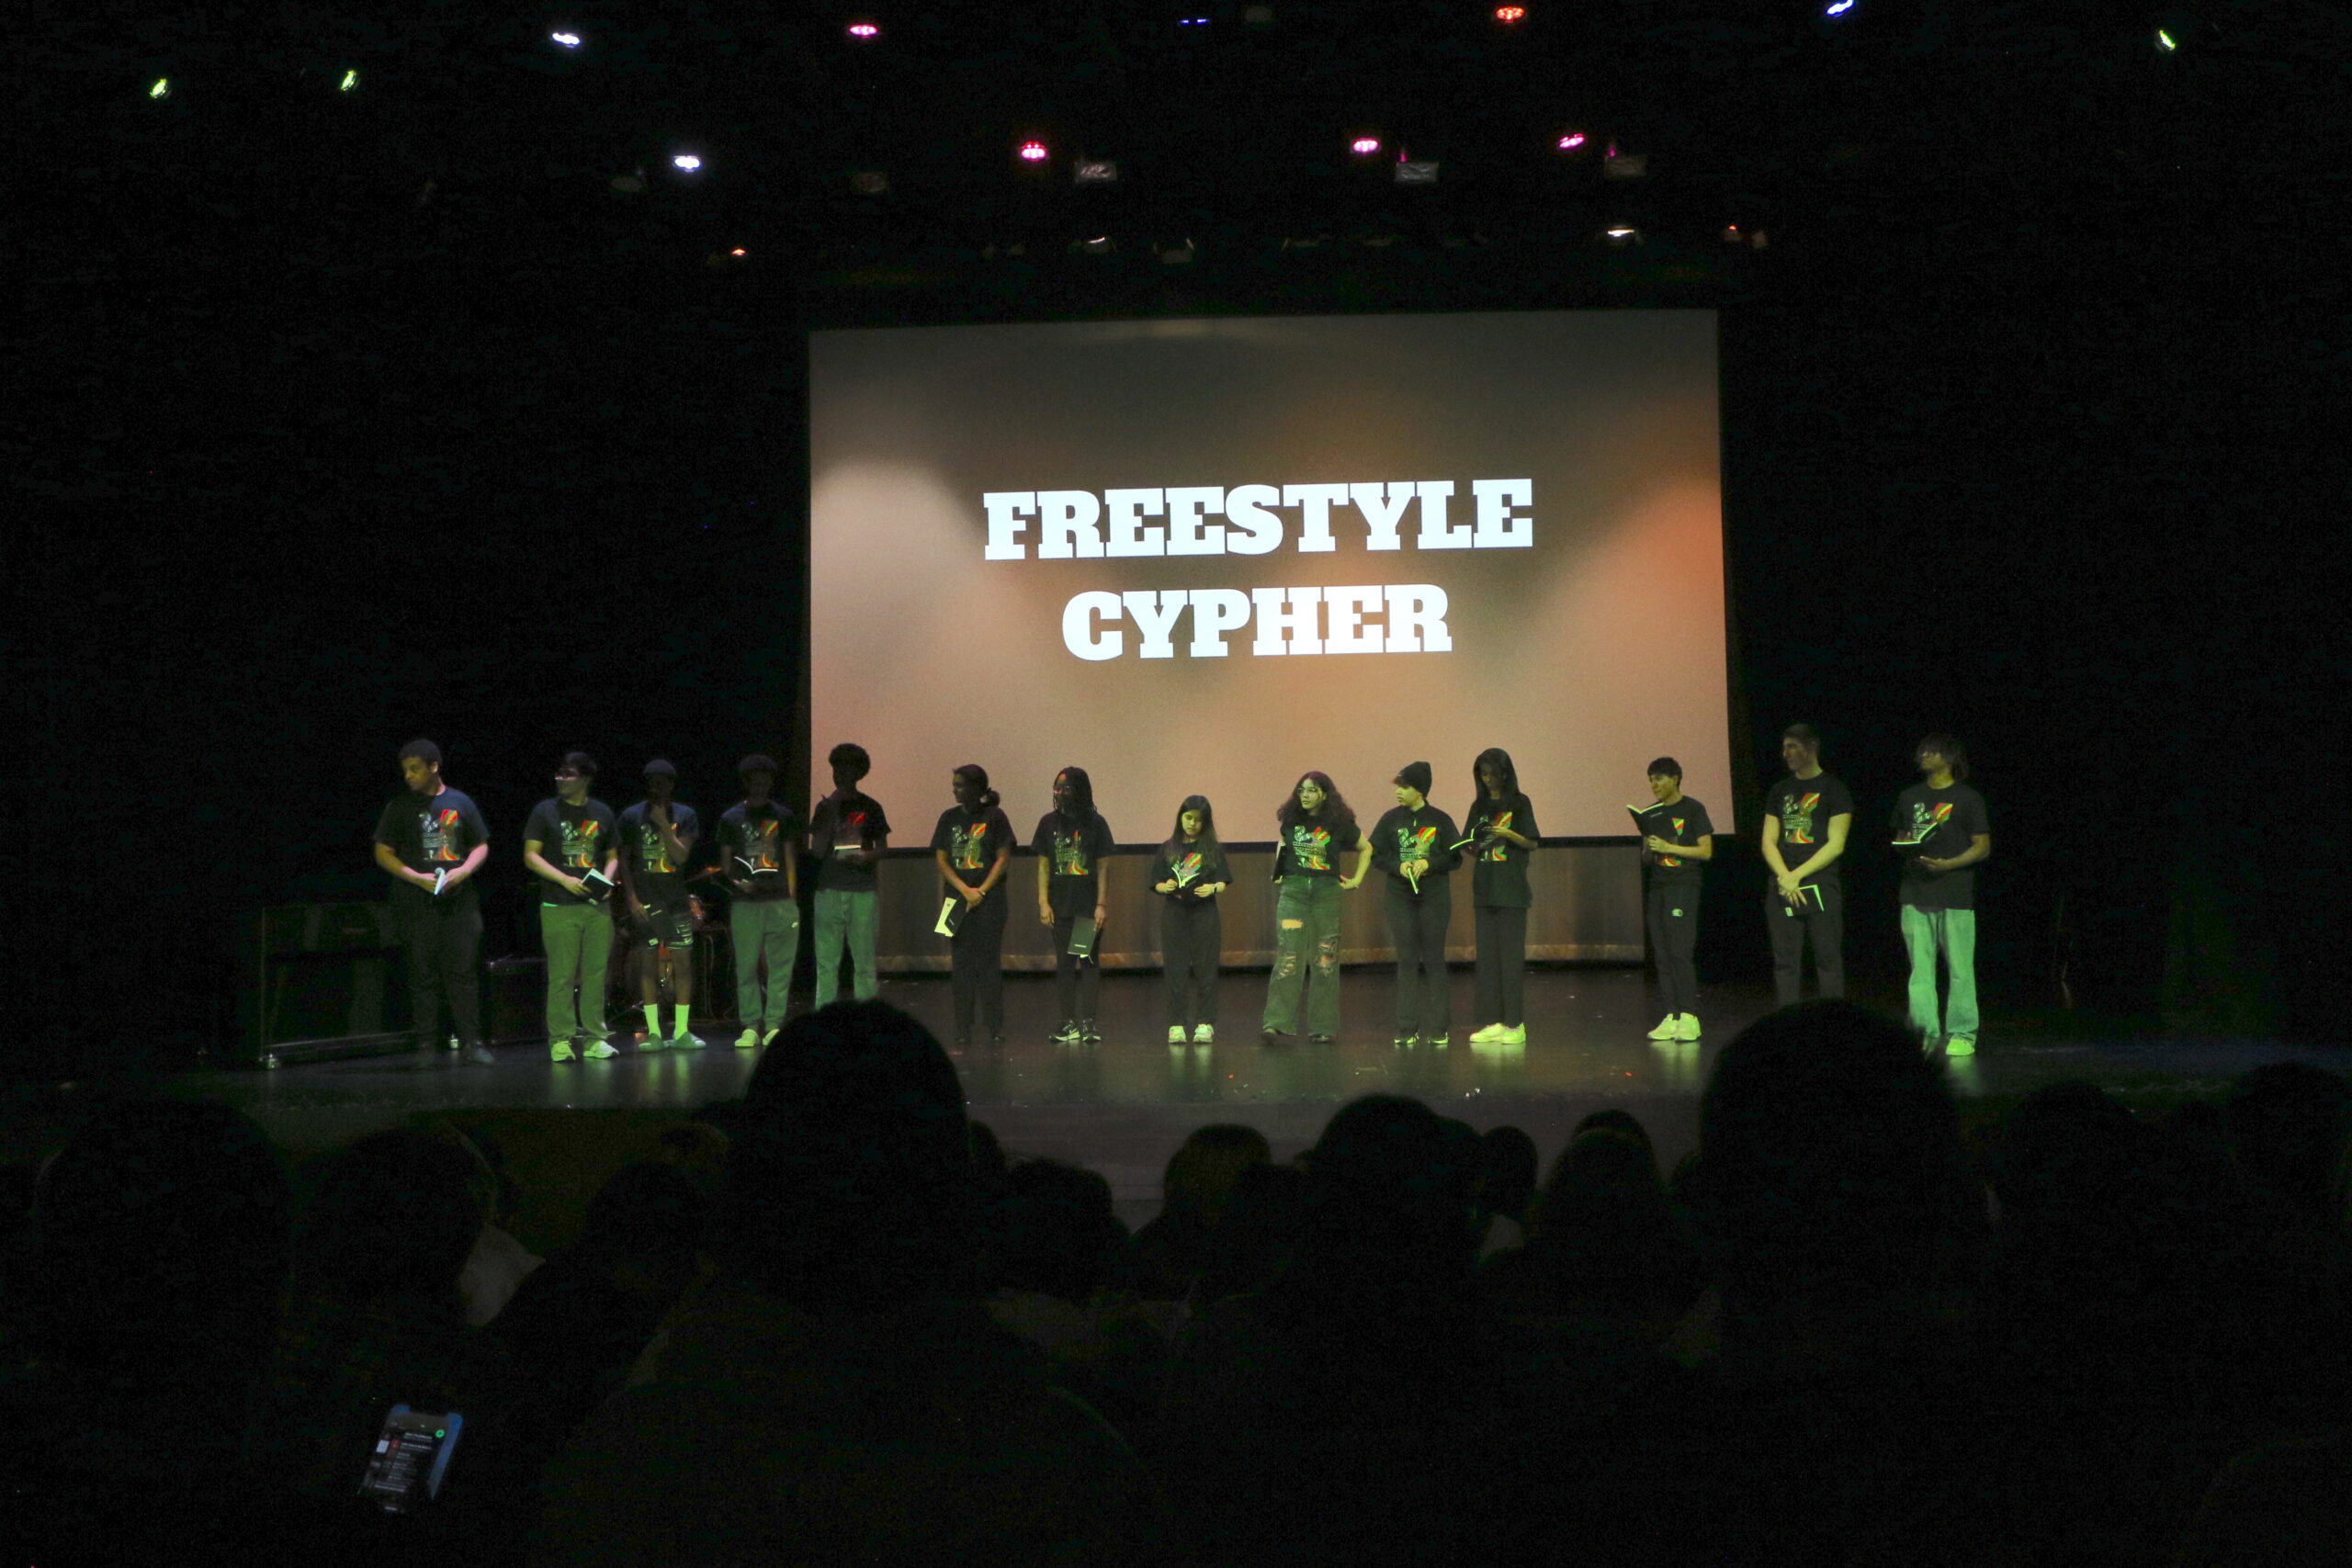 Student in front of Freestyle Cypher